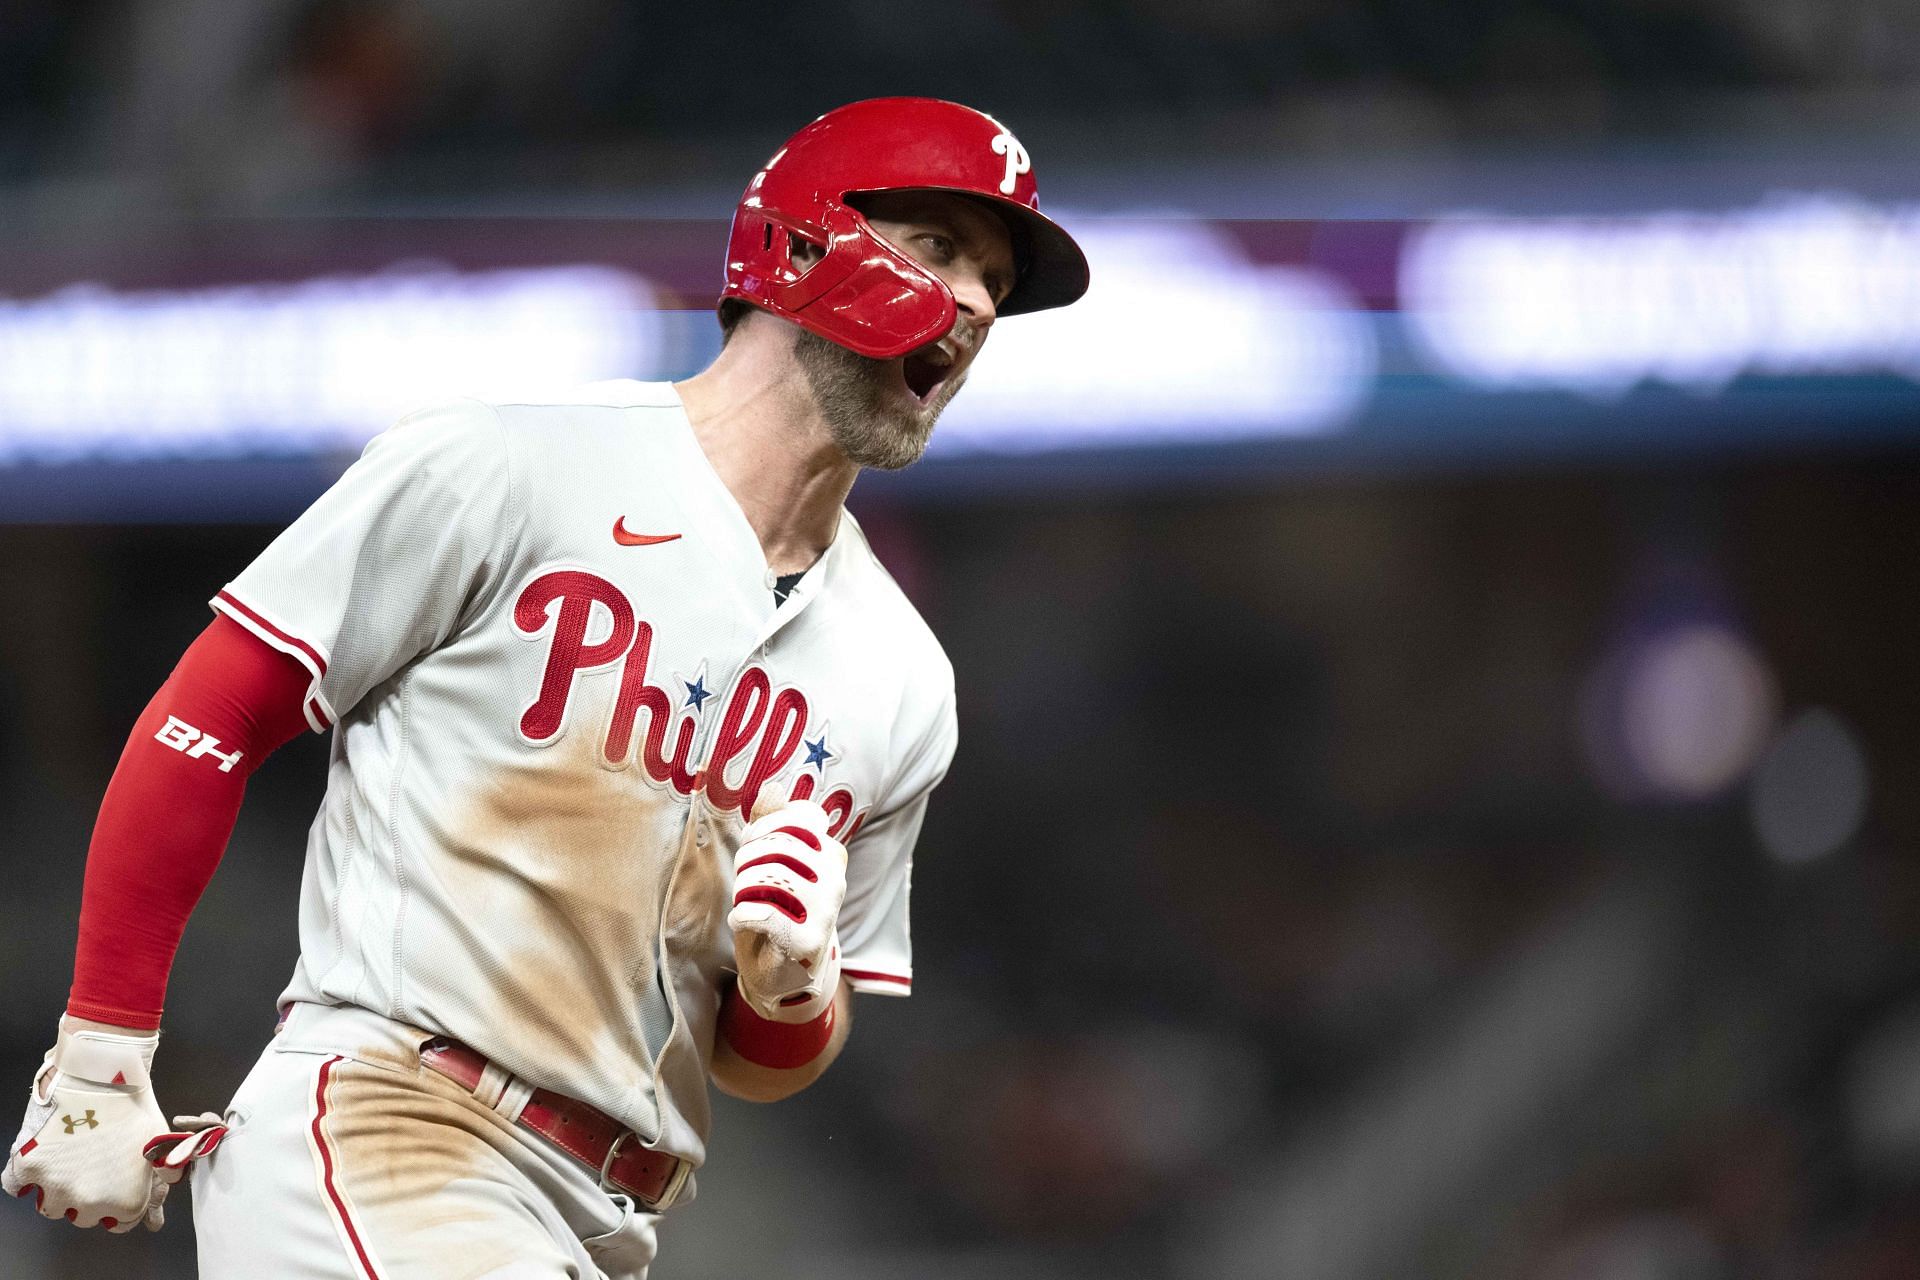 Philadelphia Phillies slugger Bryce Harper crushed the Los Angeles Angels&#039; hopes of winning this afternoon when he crushed an eighth-inning grand slam